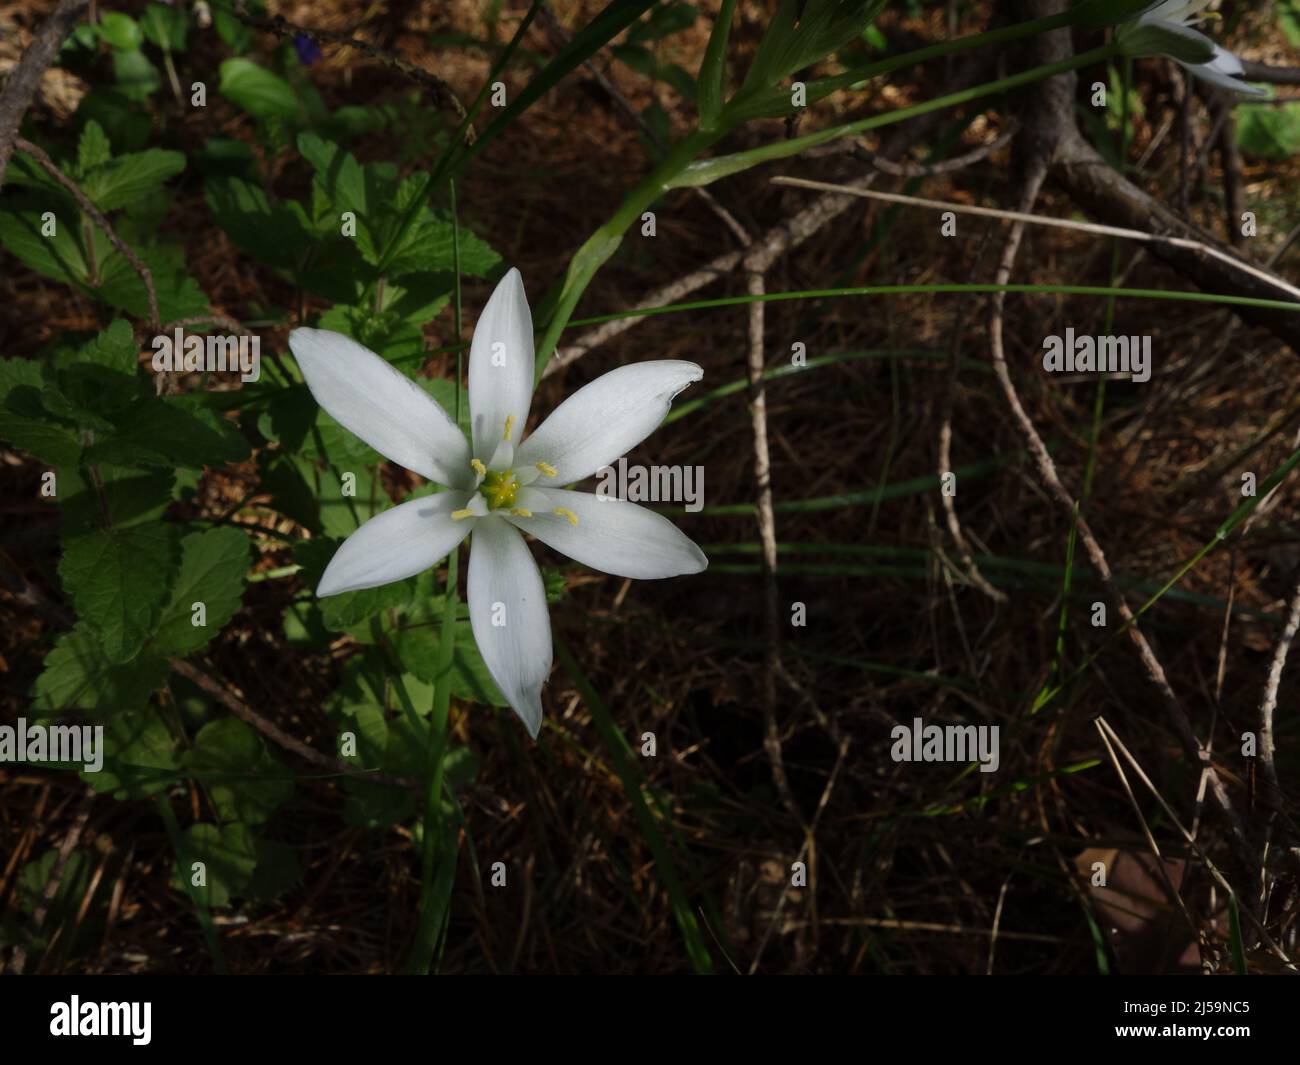 A Garden Star-of-Bethlehem, which is a white star-shaped flower, blooms at the edge of the forest, which is very unusual in Norwegian nature. Stock Photo